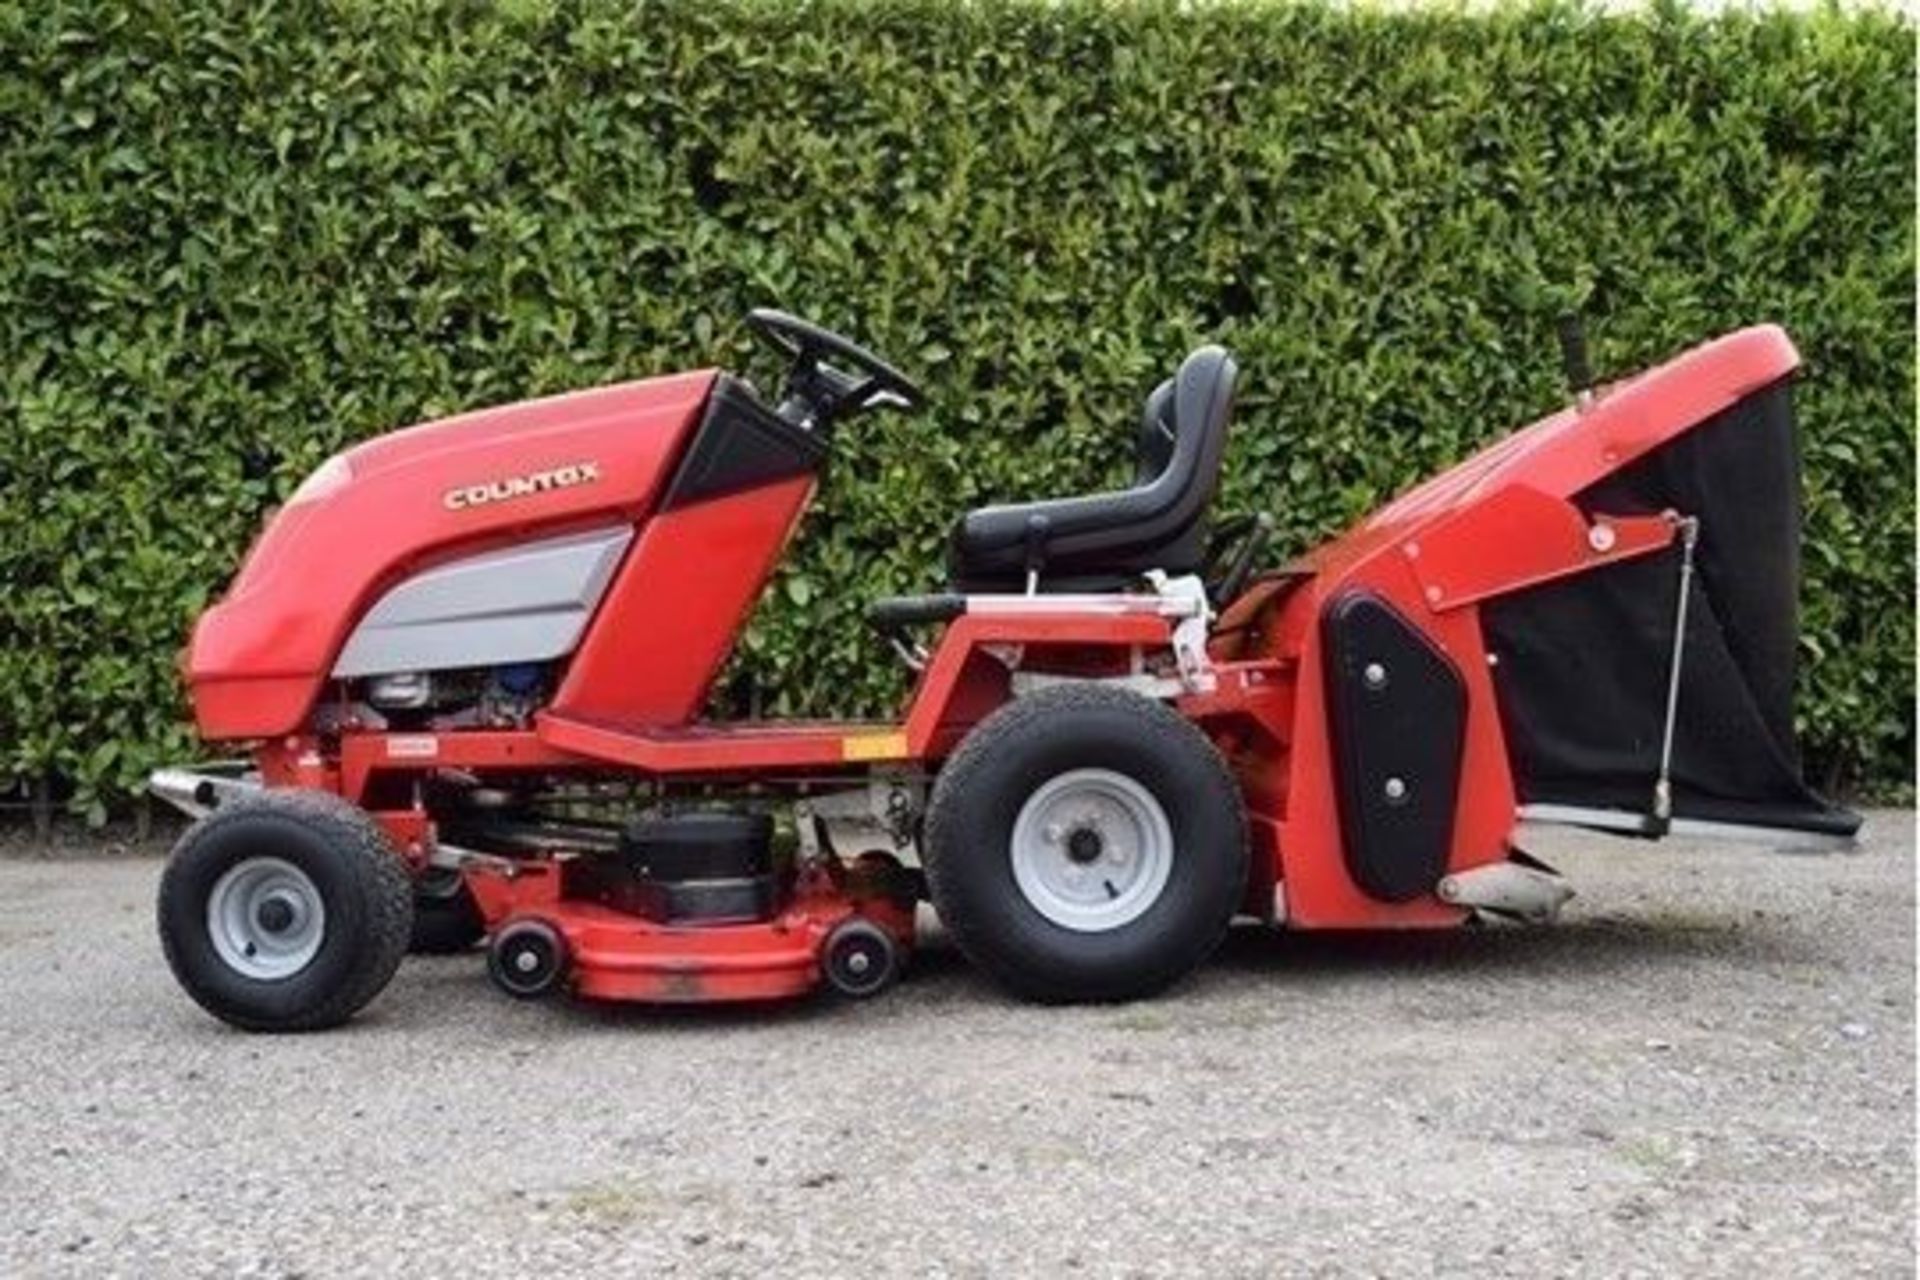 Countax C800H 44" Rear Discharge Garden Tractor With PGC. - Image 4 of 4